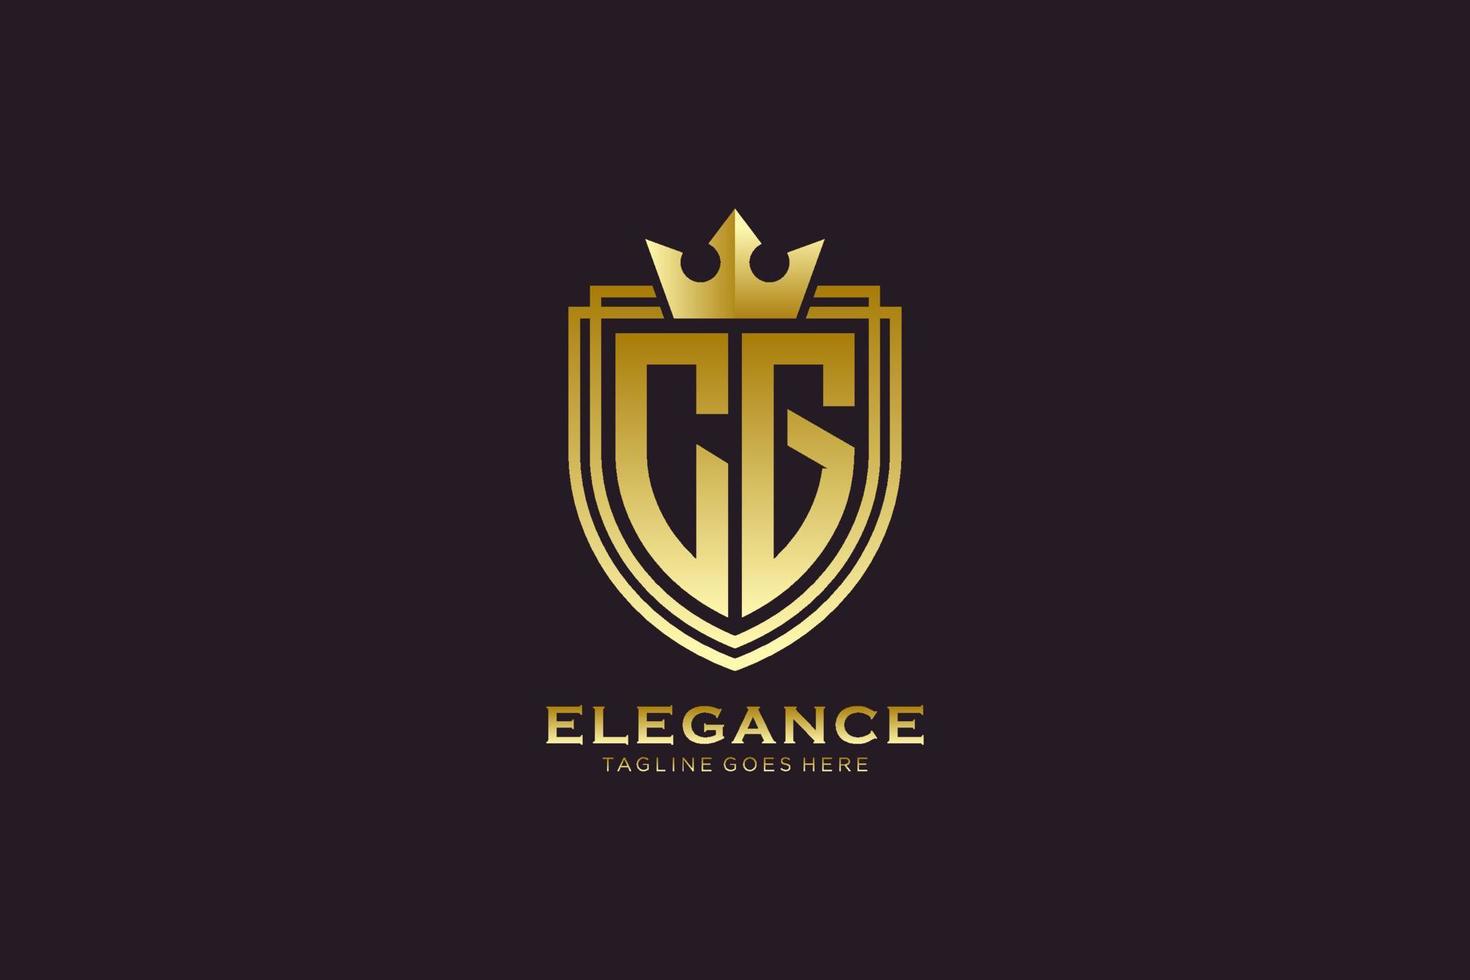 initial CG elegant luxury monogram logo or badge template with scrolls and royal crown - perfect for luxurious branding projects vector